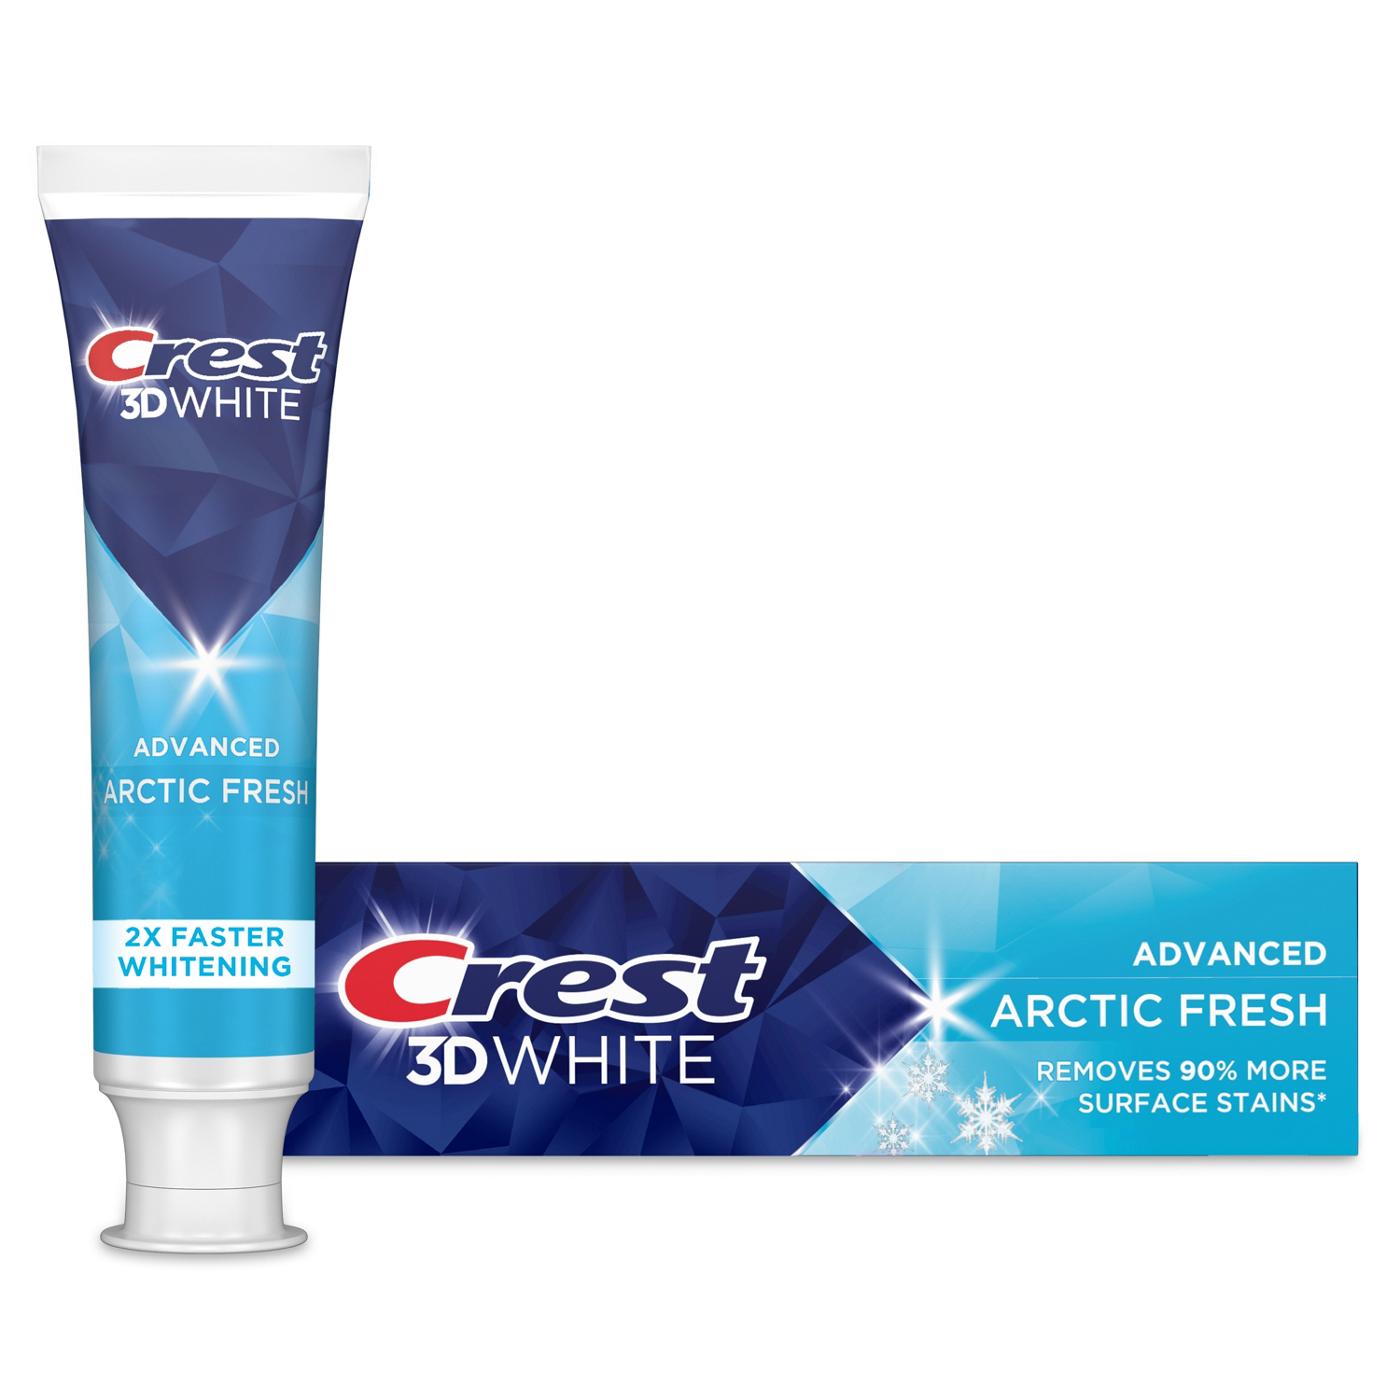 Crest 3D White Advanced Whitening Toothpaste - Arctic Fresh; image 7 of 8